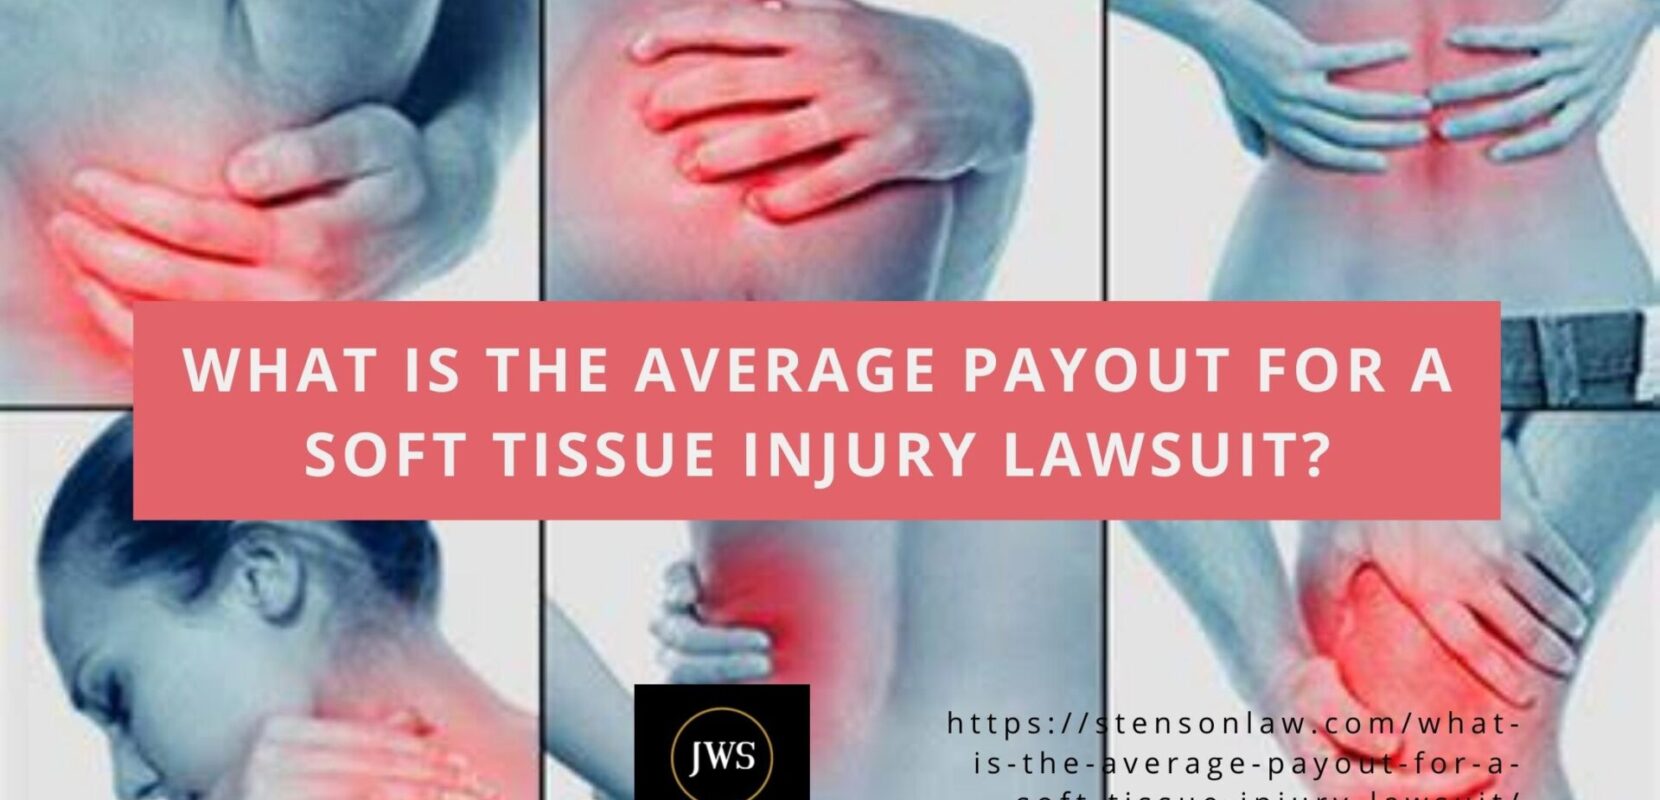 What is the Average Payout for a Soft Tissue Injury Lawsuit?